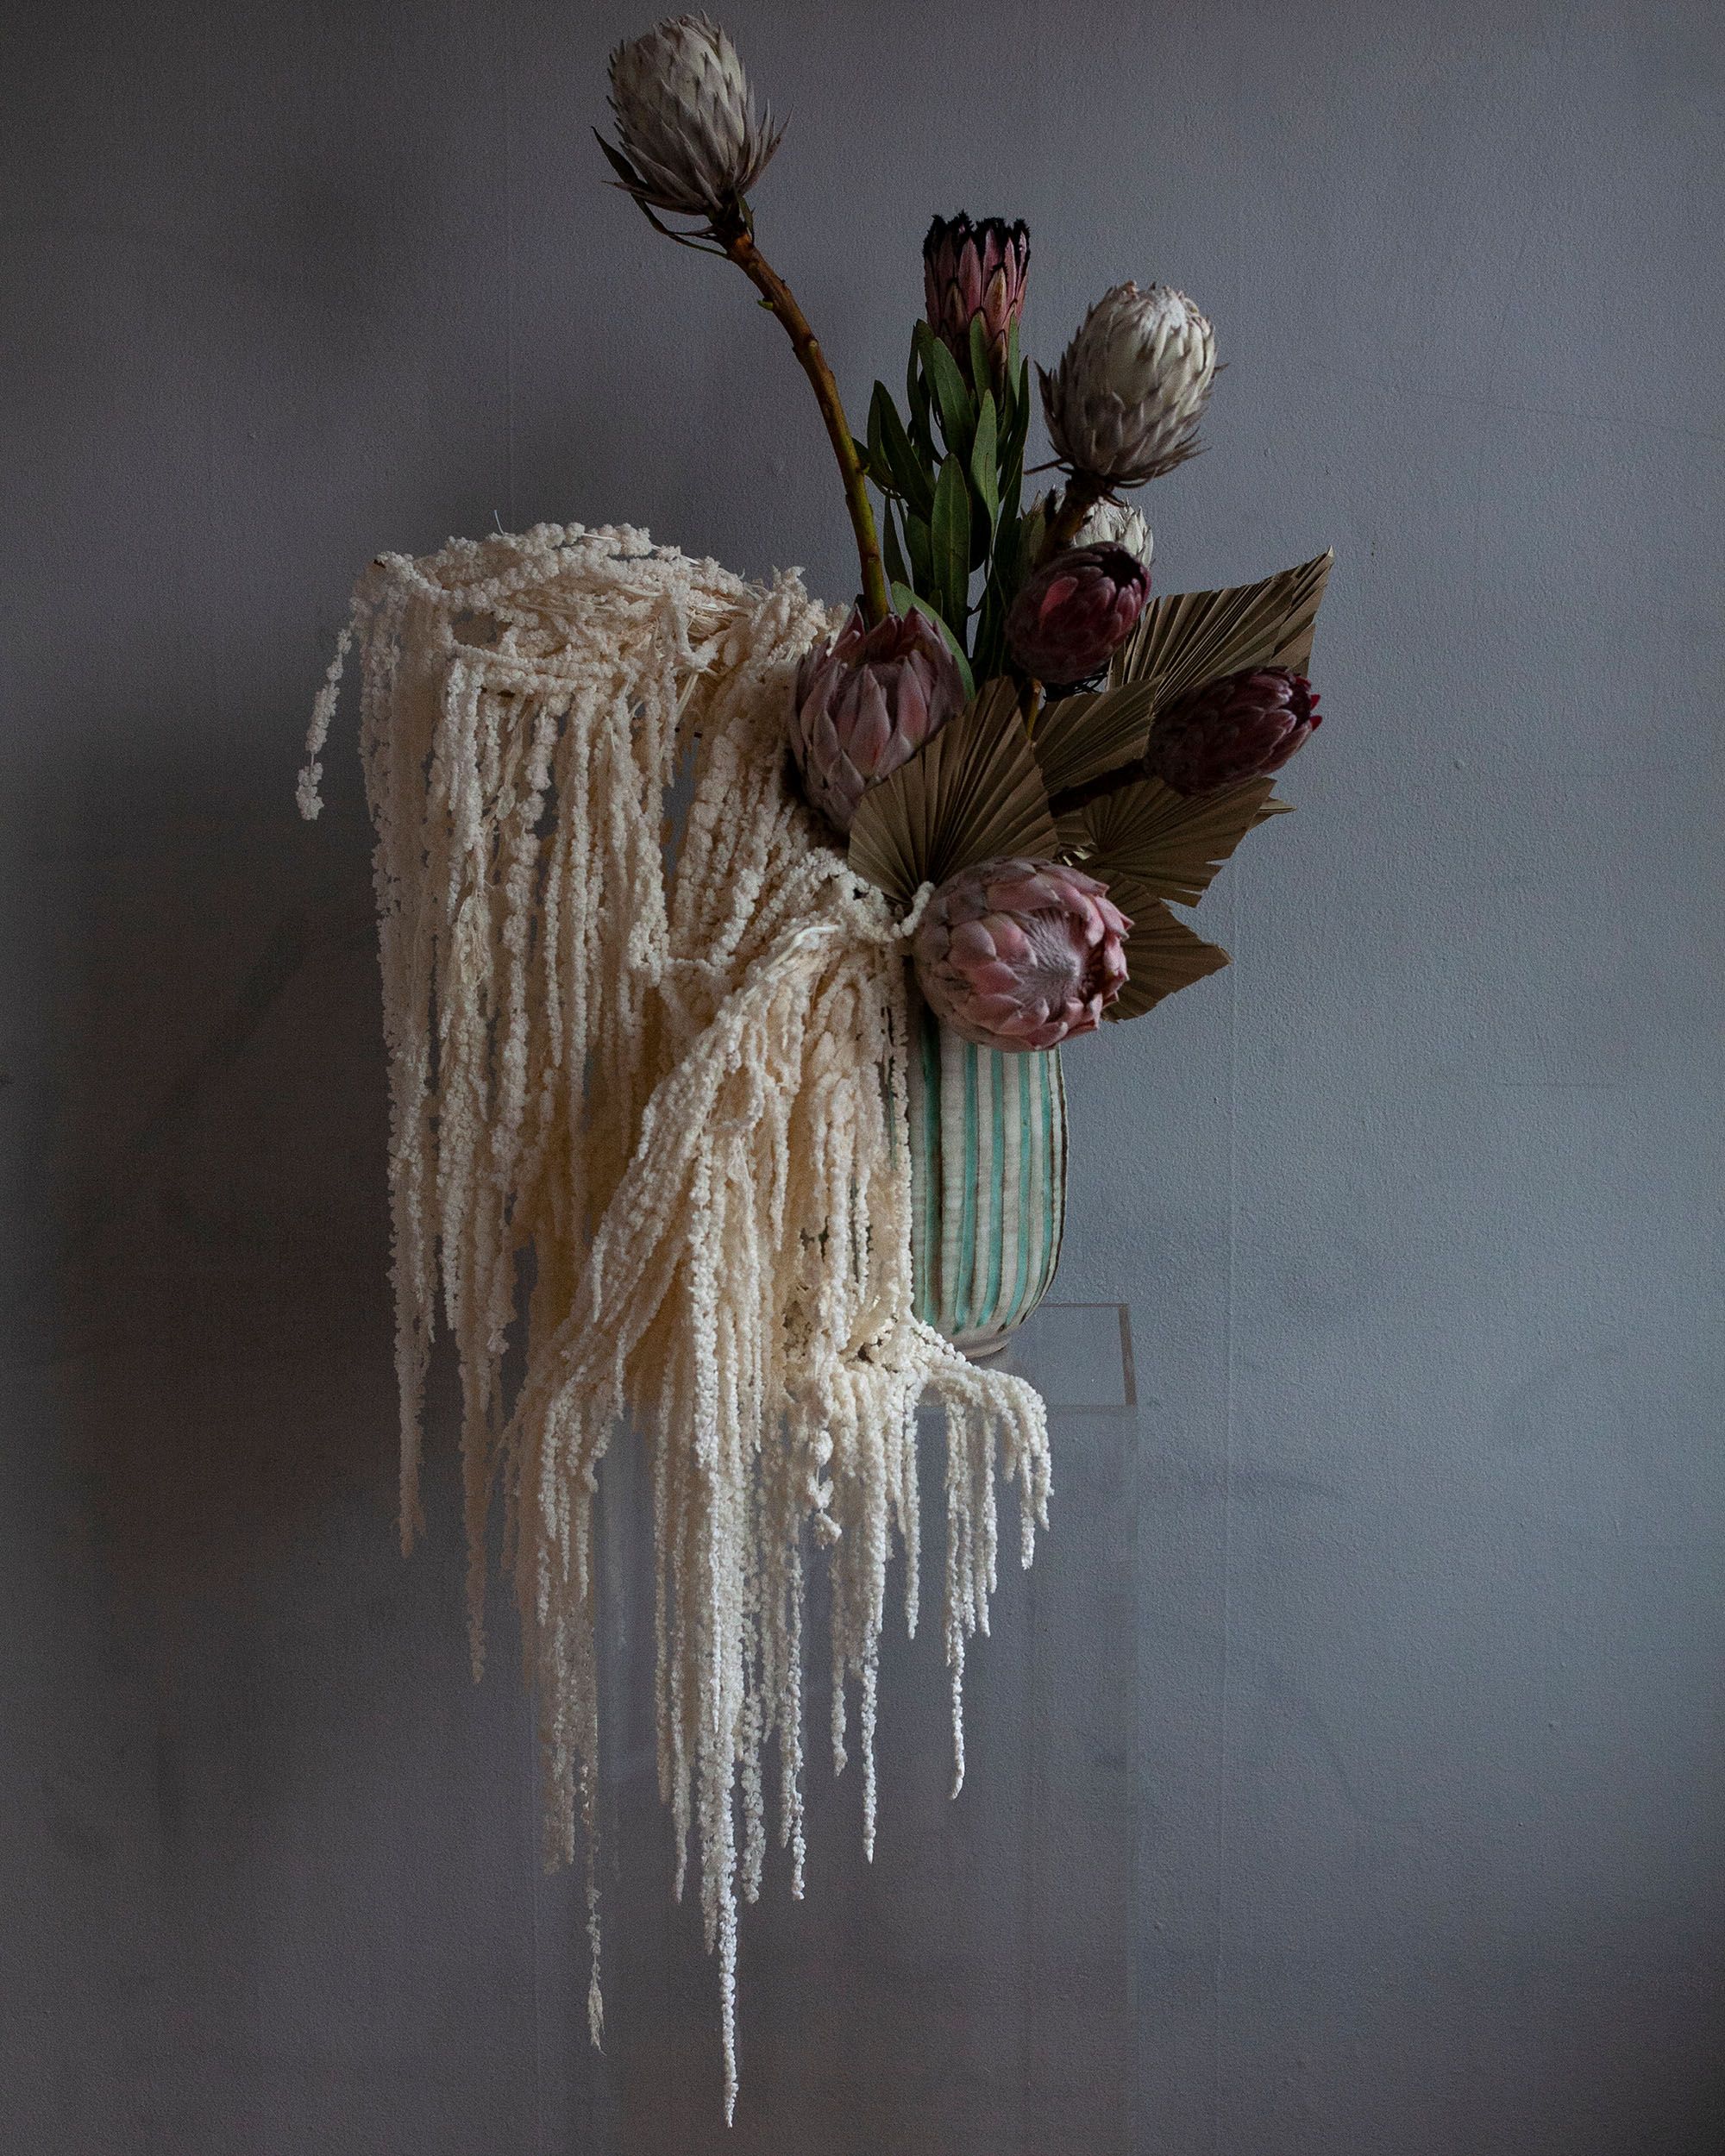 Dried Flower Wrap Bouquet – Petals to the Metal Floral